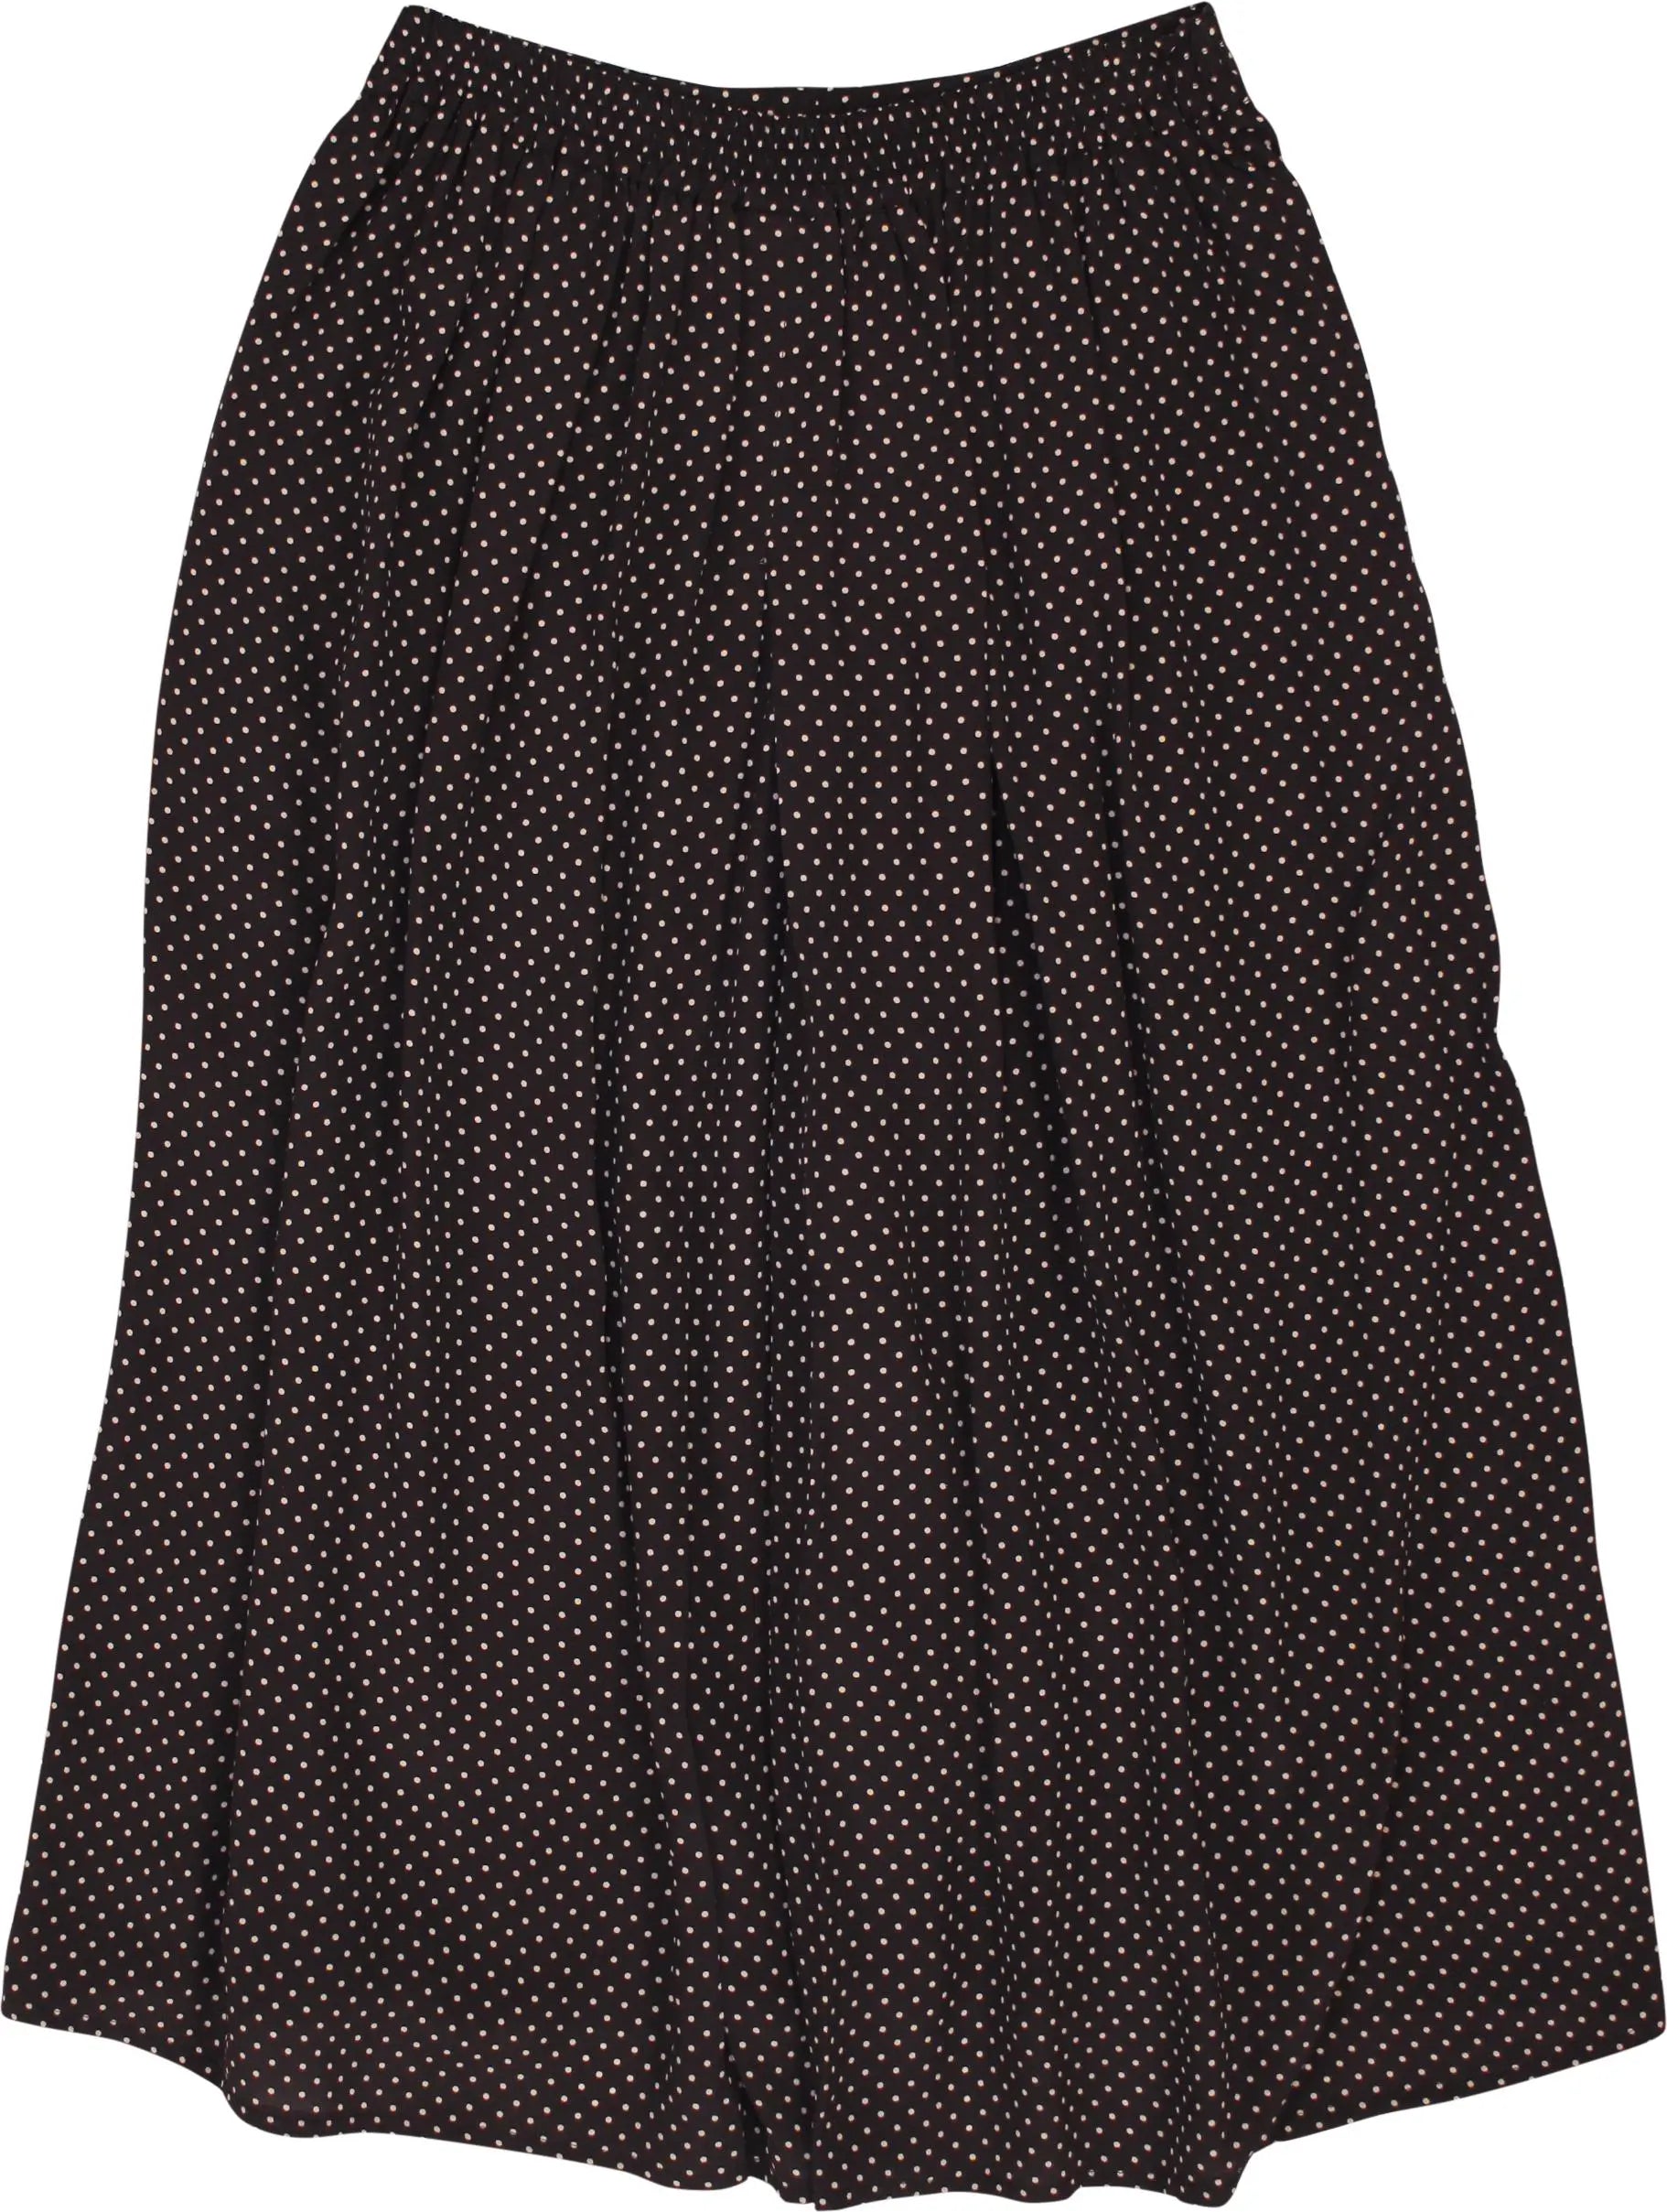 OuiSet - Pleated Skirt with Polkadot Print- ThriftTale.com - Vintage and second handclothing